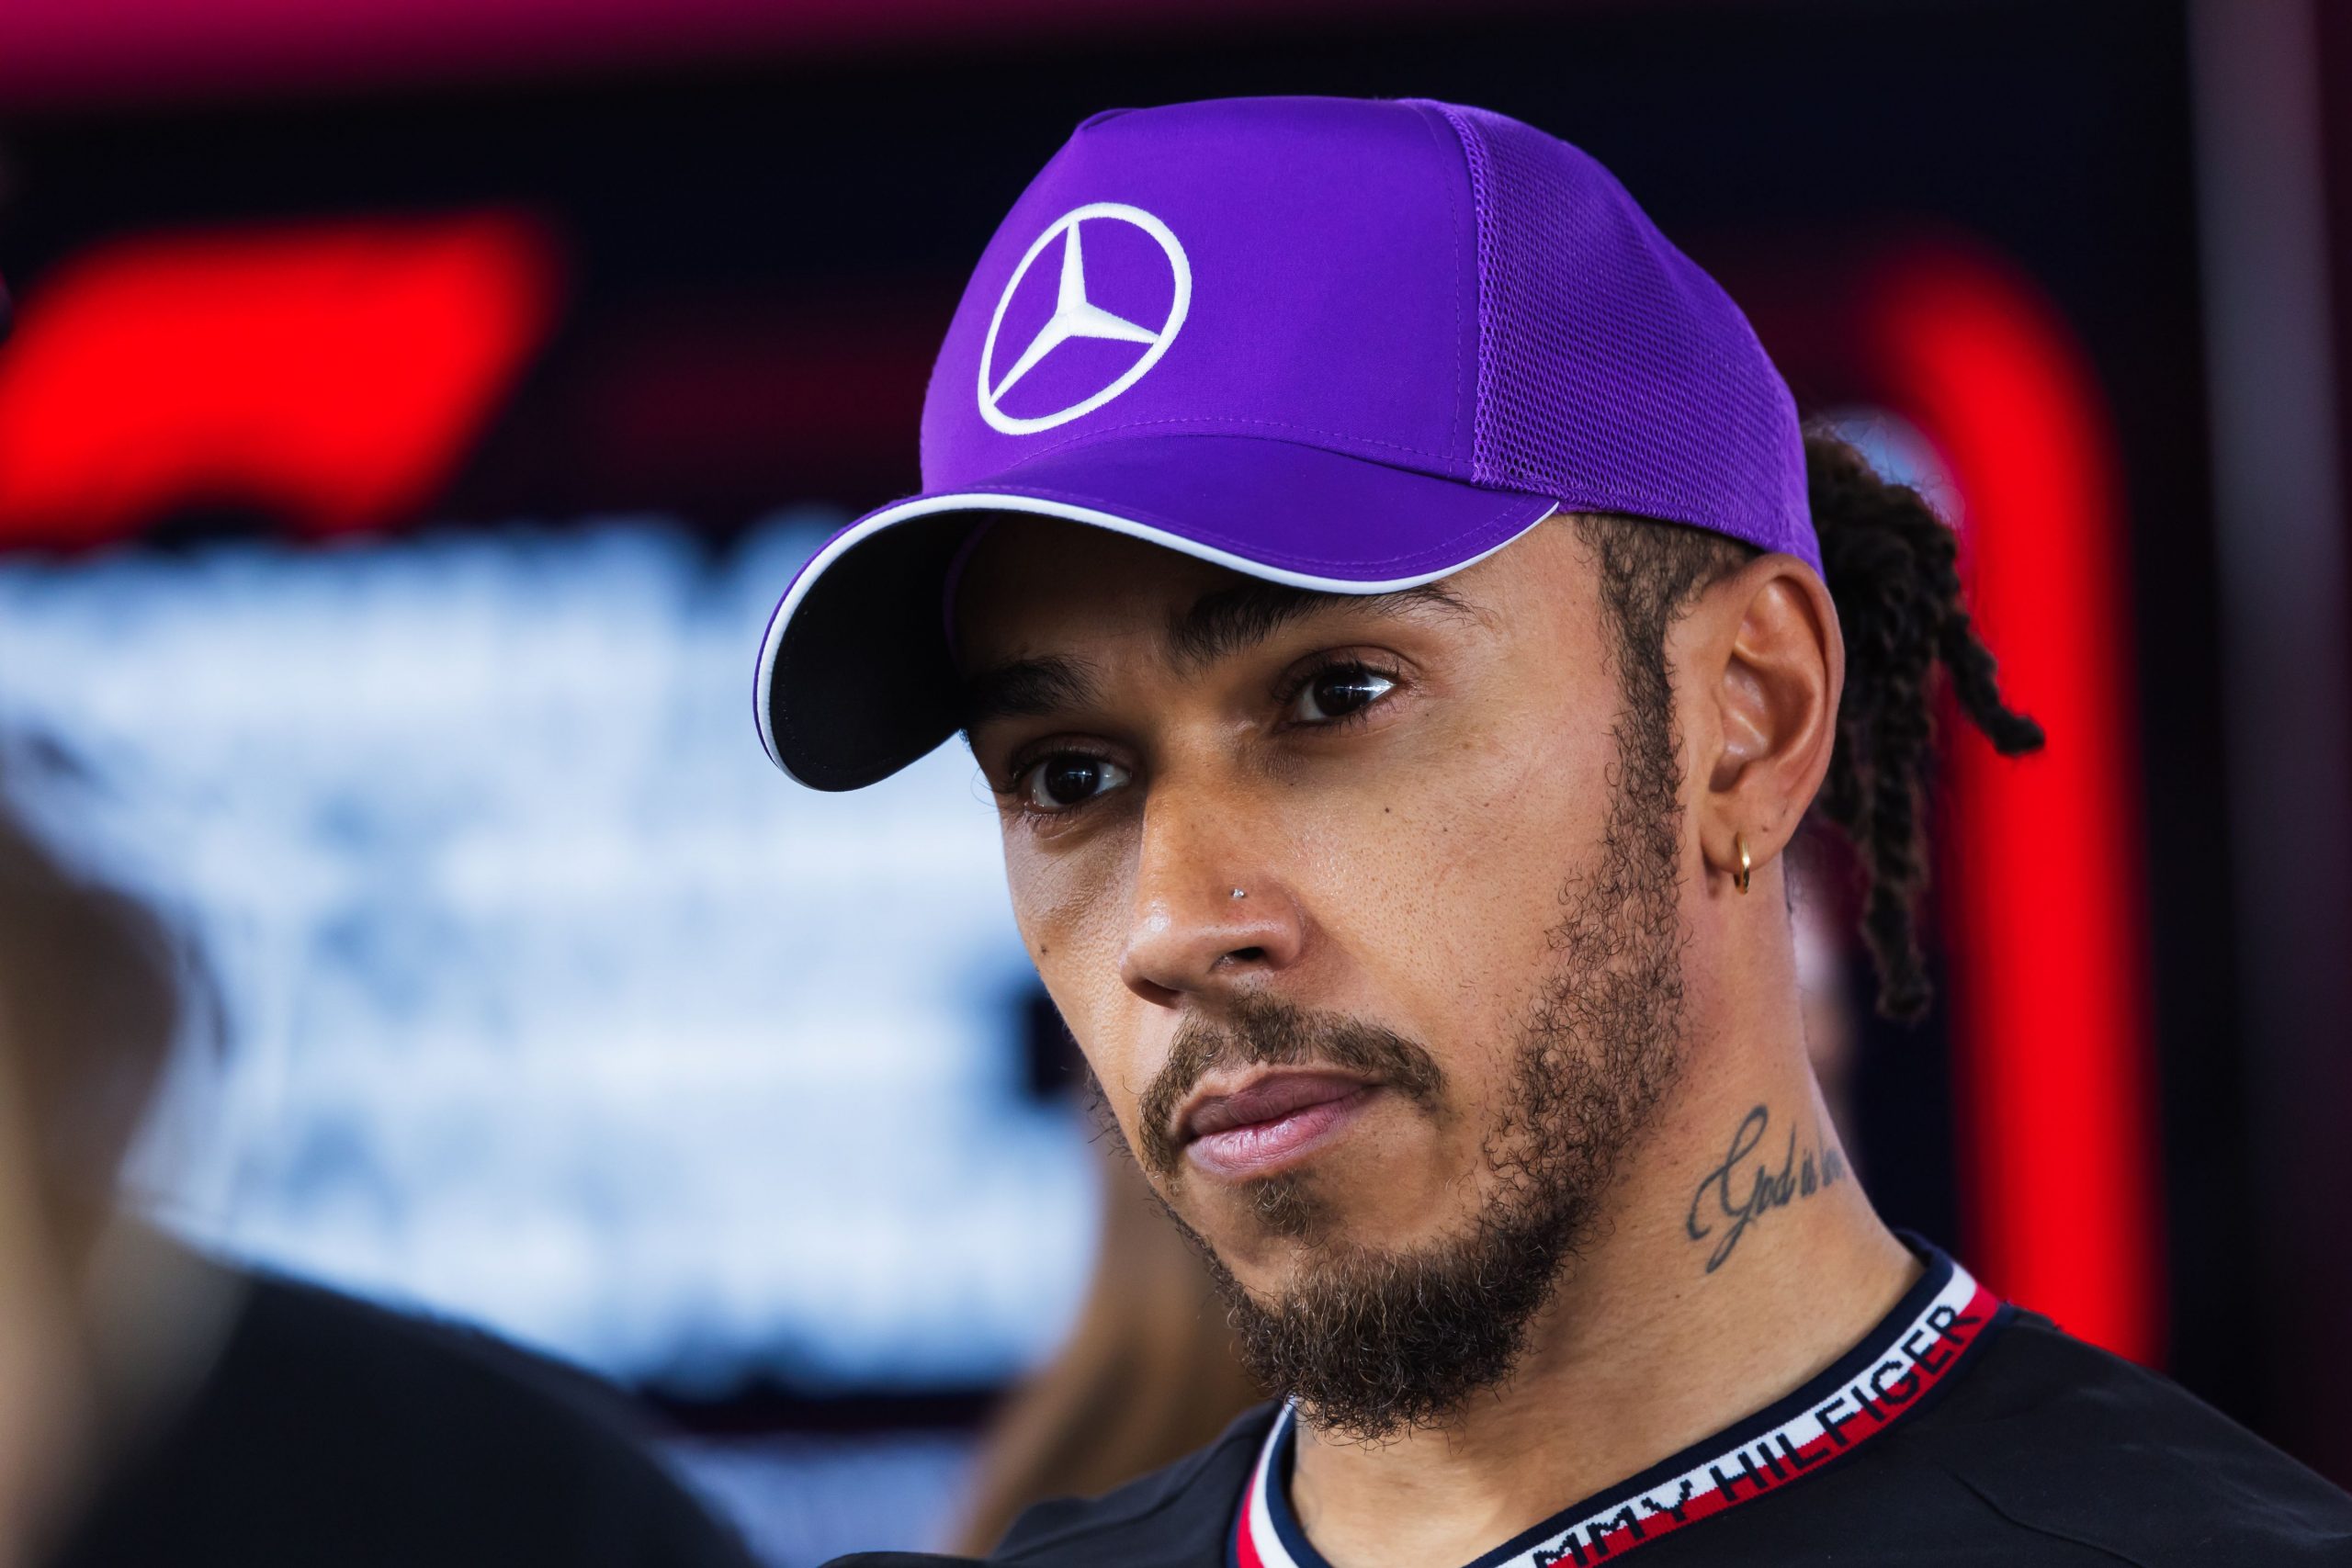 Lewis Hamilton’s first race for Ferrari CONFIRMED in shock move from F1 chiefs… and it’s bad news for the Brit legendIt will be a decade since Hamilton last won on the circuit